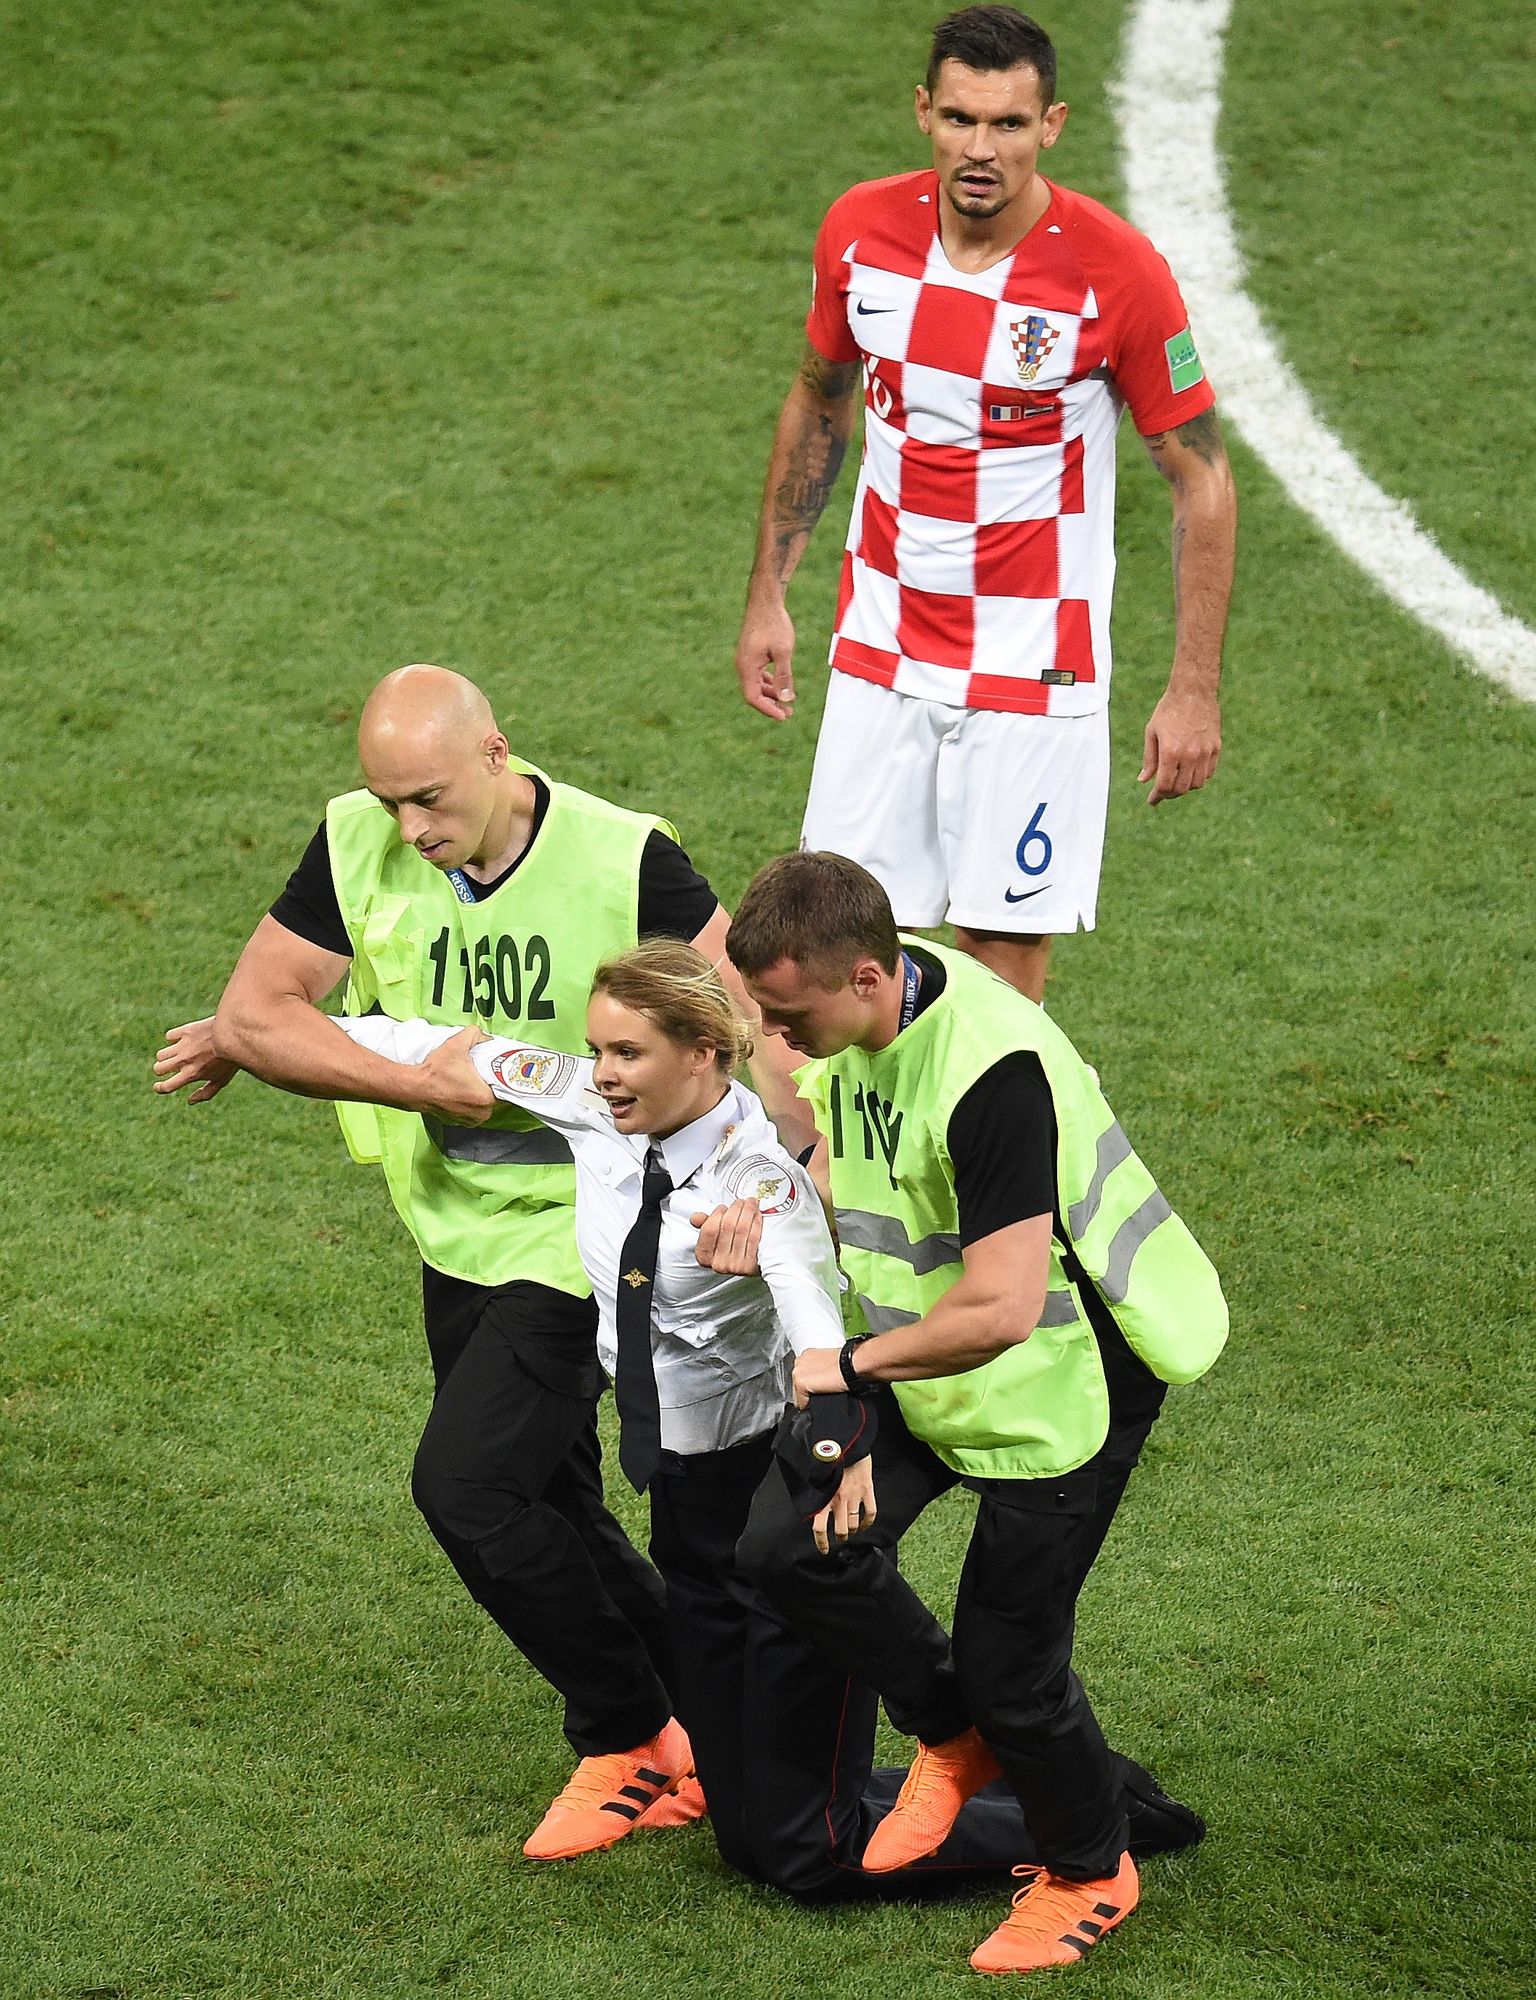 FIFA World Cup Russia 2018. Final. France v Croatia at Luzhniki Stadium. Security take out the member of Russian punk-rock band Pussy Riot during the match. on July 15, 2018 in Moscow, Russia. (Photo by Dmitry Korotaev/Kommersant/Sipa USA)